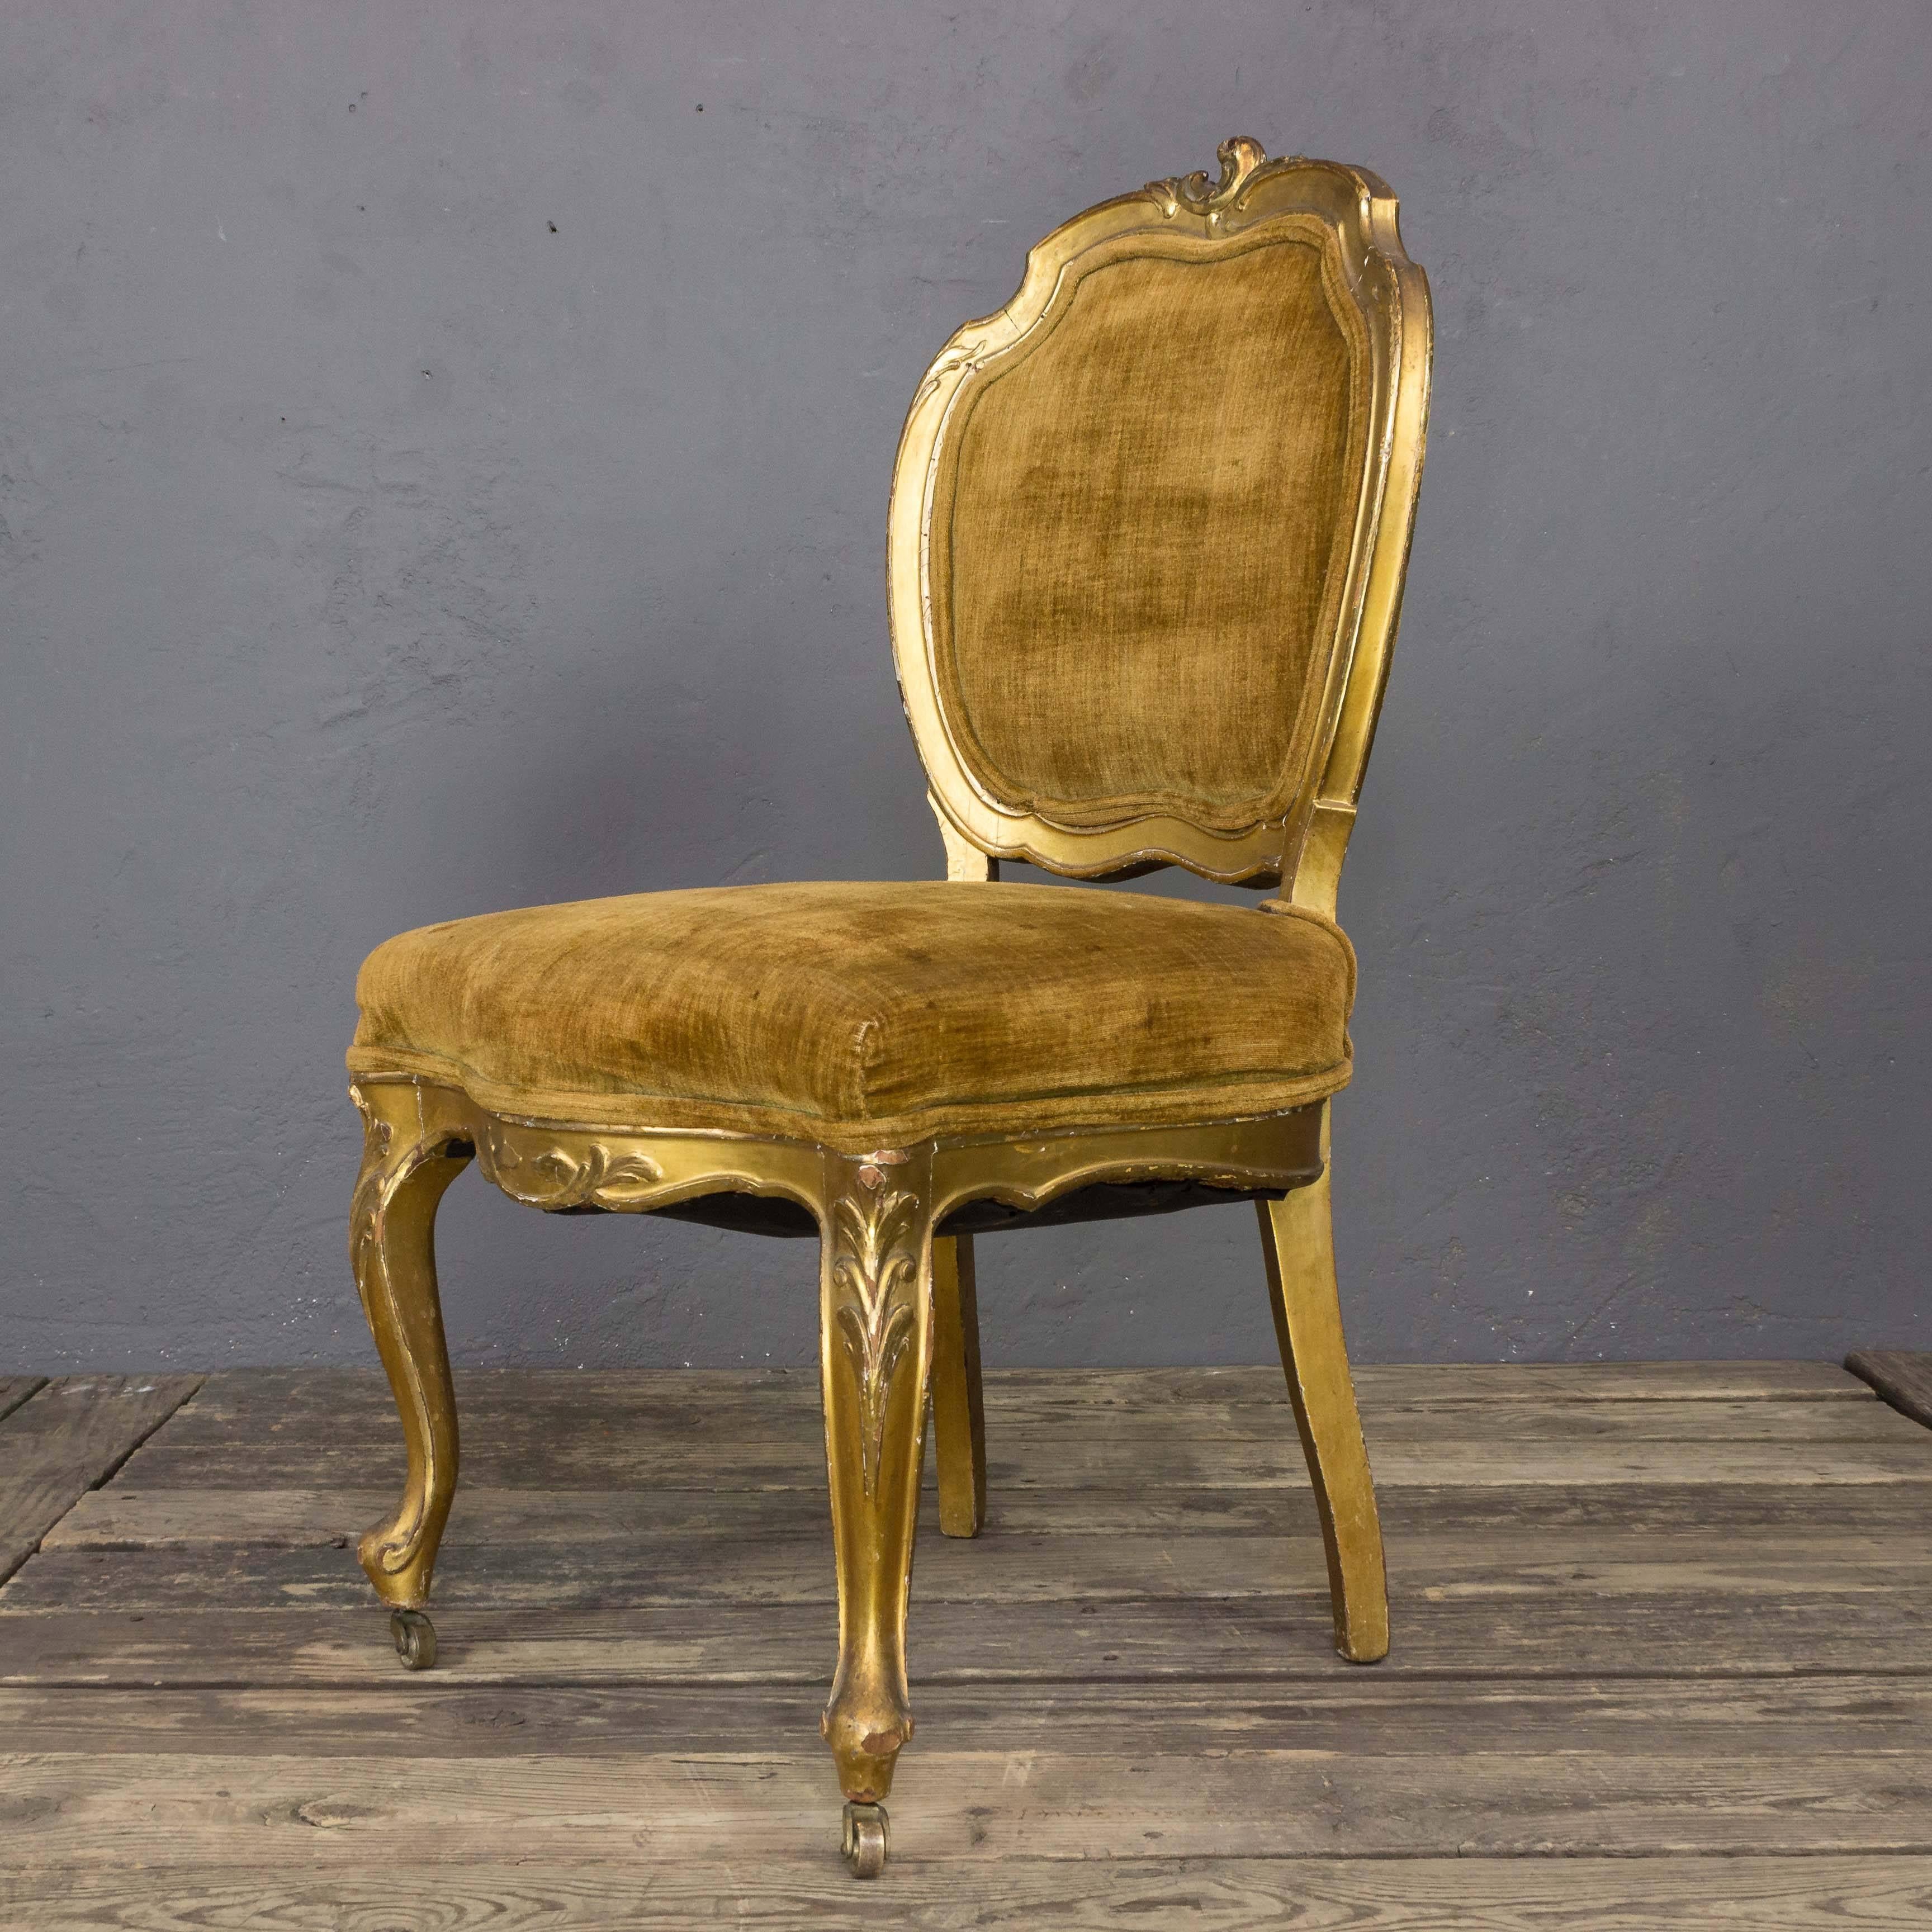 Pair of French 19th century giltwood side chairs with distressed brown upholstery. The gilding is original and shows a beautiful aged patina. The chairs need to be upholstered. Sold as is. Upholstery services available, price on request.

